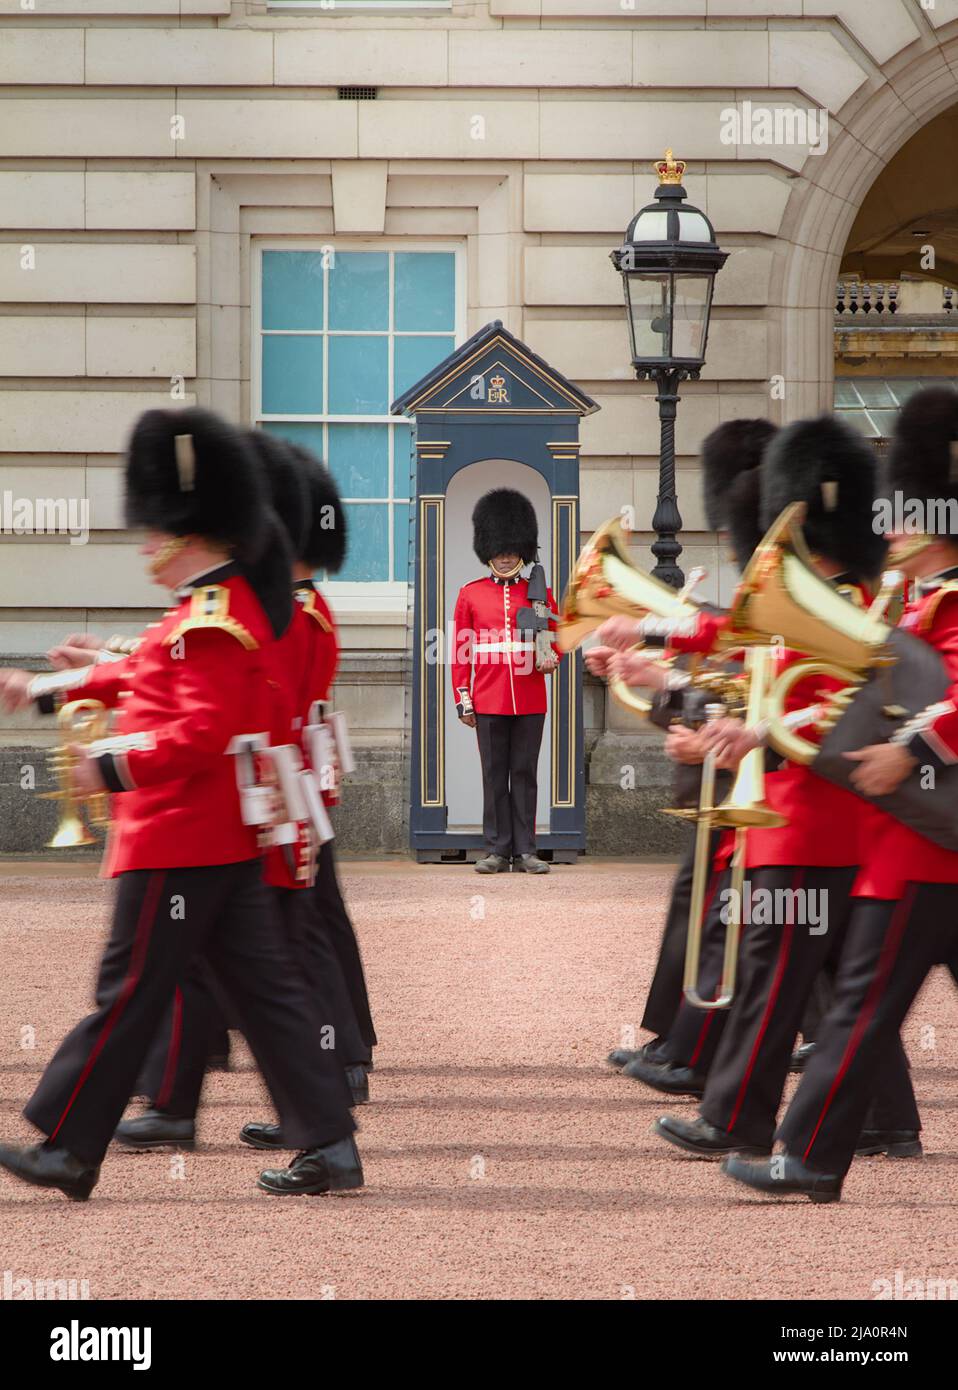 Regimental Band Or Corps Of Drums Of The Queens Guard Marching Past A New Guard Positioned In His Sentry Box Standing To Attention, Buckingham Palace Stock Photo